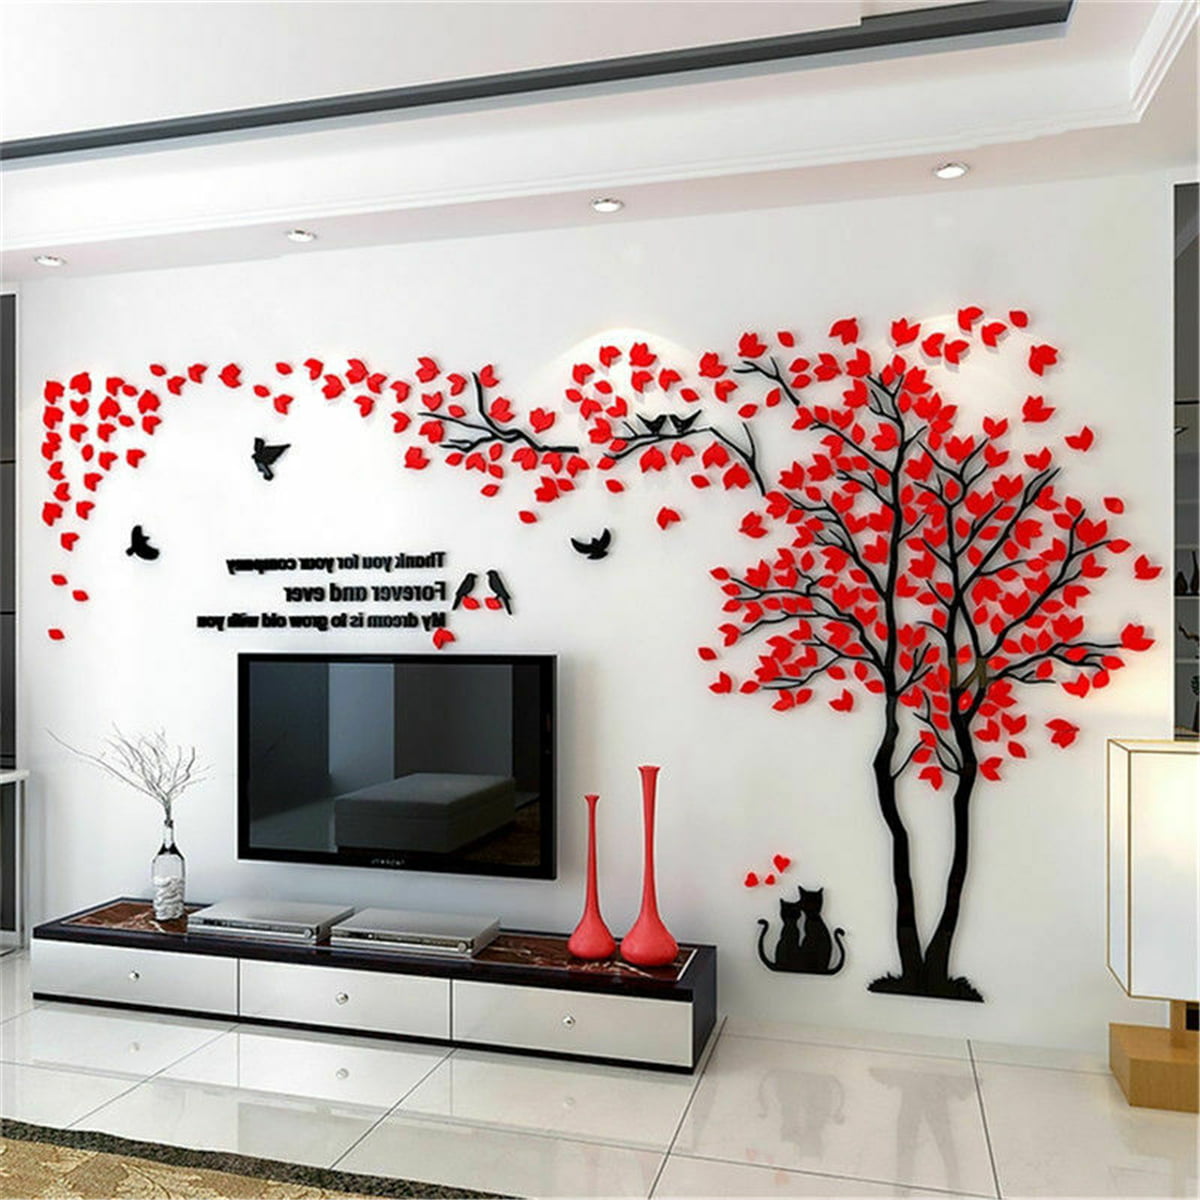 decalmile Palm Tree Wall Decals Tropical Plant Bird Wall Stickers Bedroom TV Wall Living Room Wall Decor H:145CM 